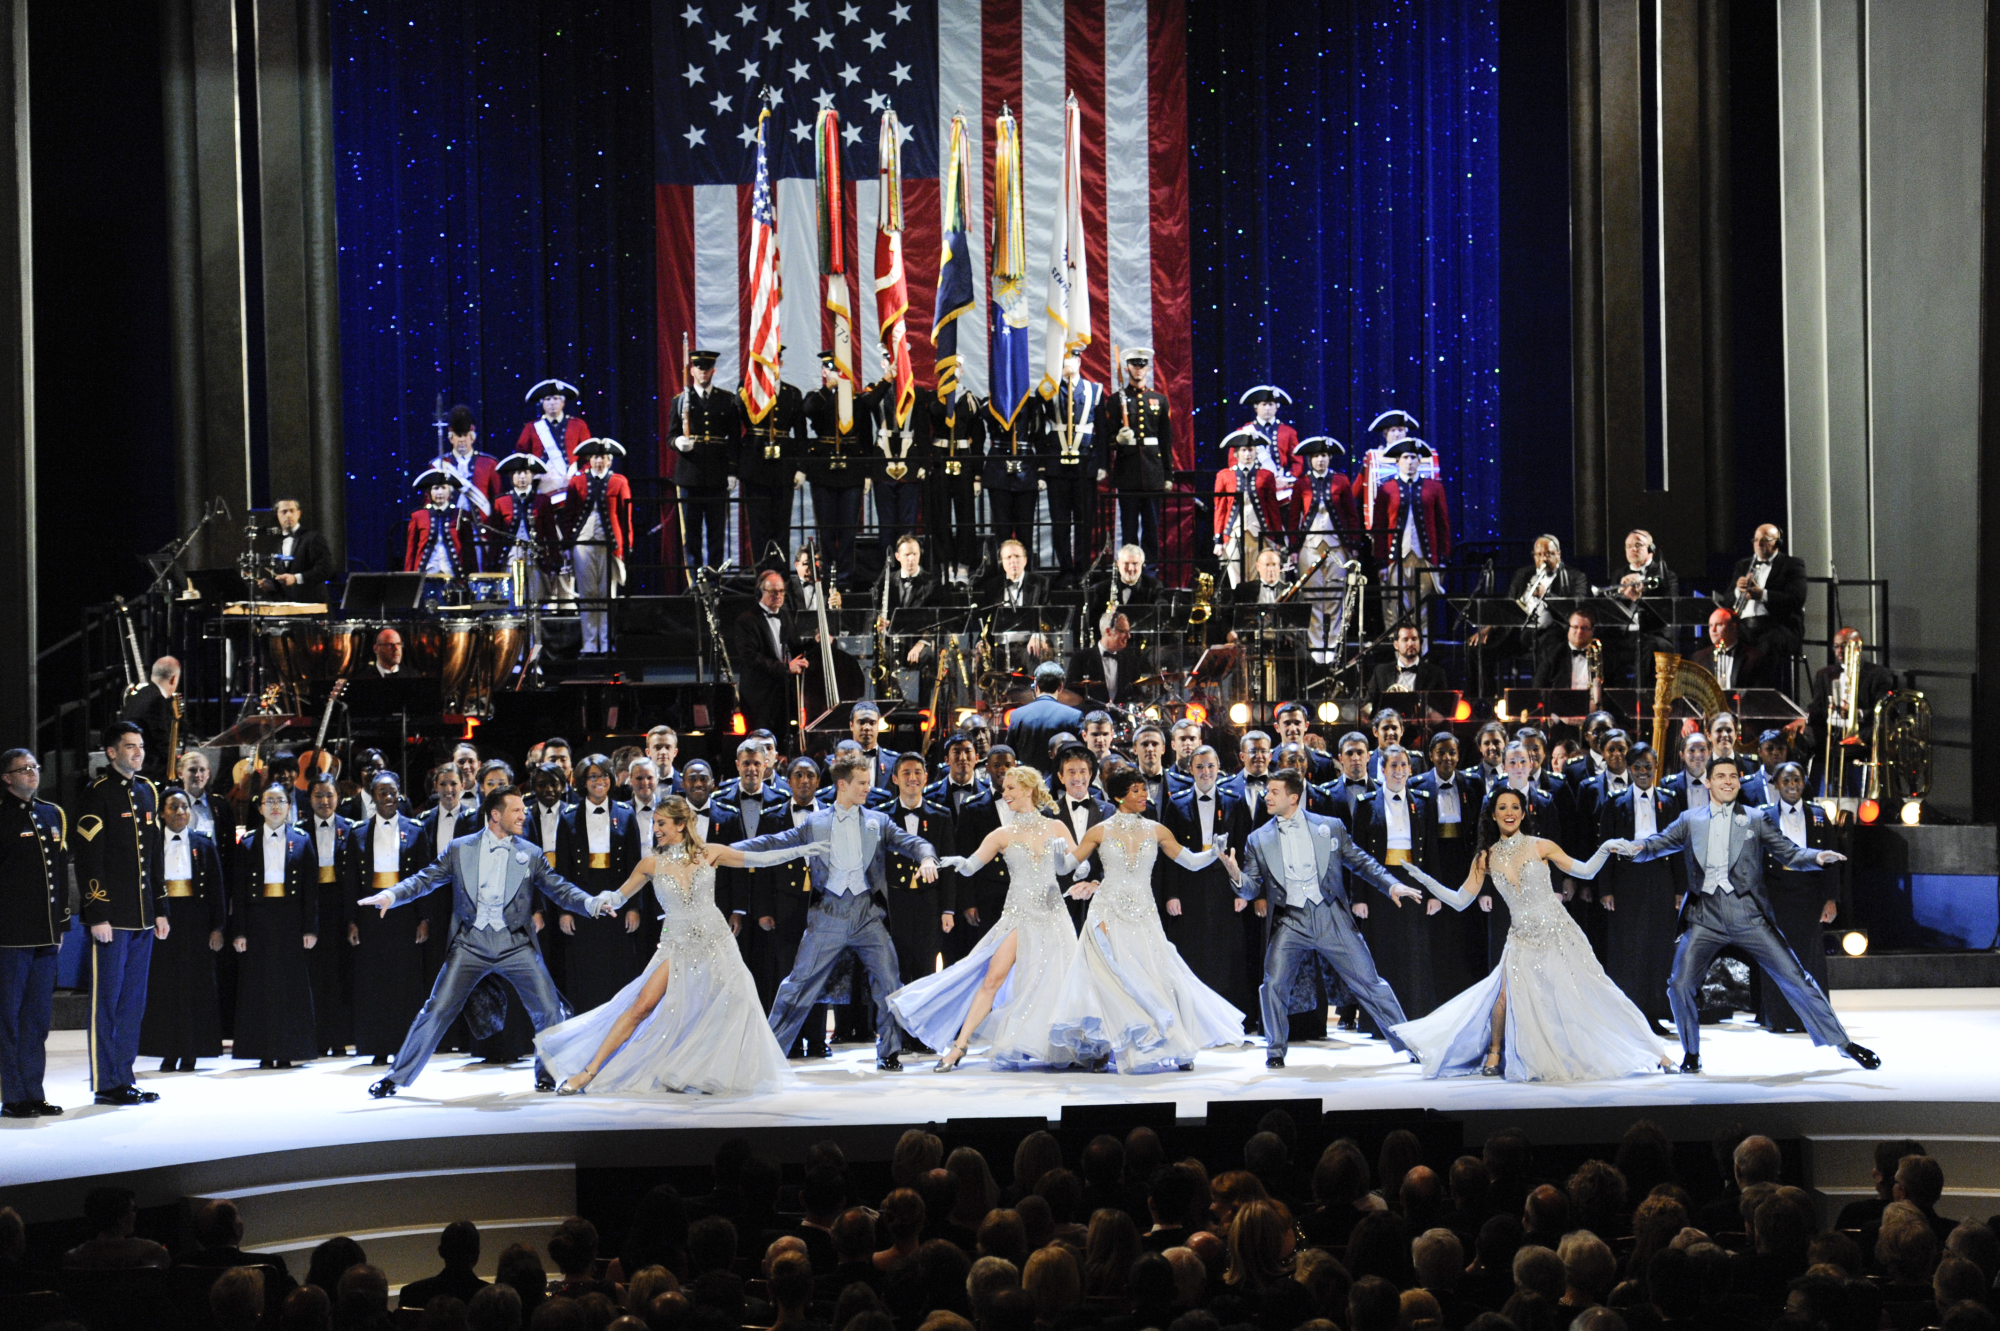 U.S. Army Chorus, the U.S. Army Color Guard, the U.S. Naval Academy Gospel Choir, the Old Guard Fife and Drum Corps and the United States Air Force Band's Ceremonial Brass